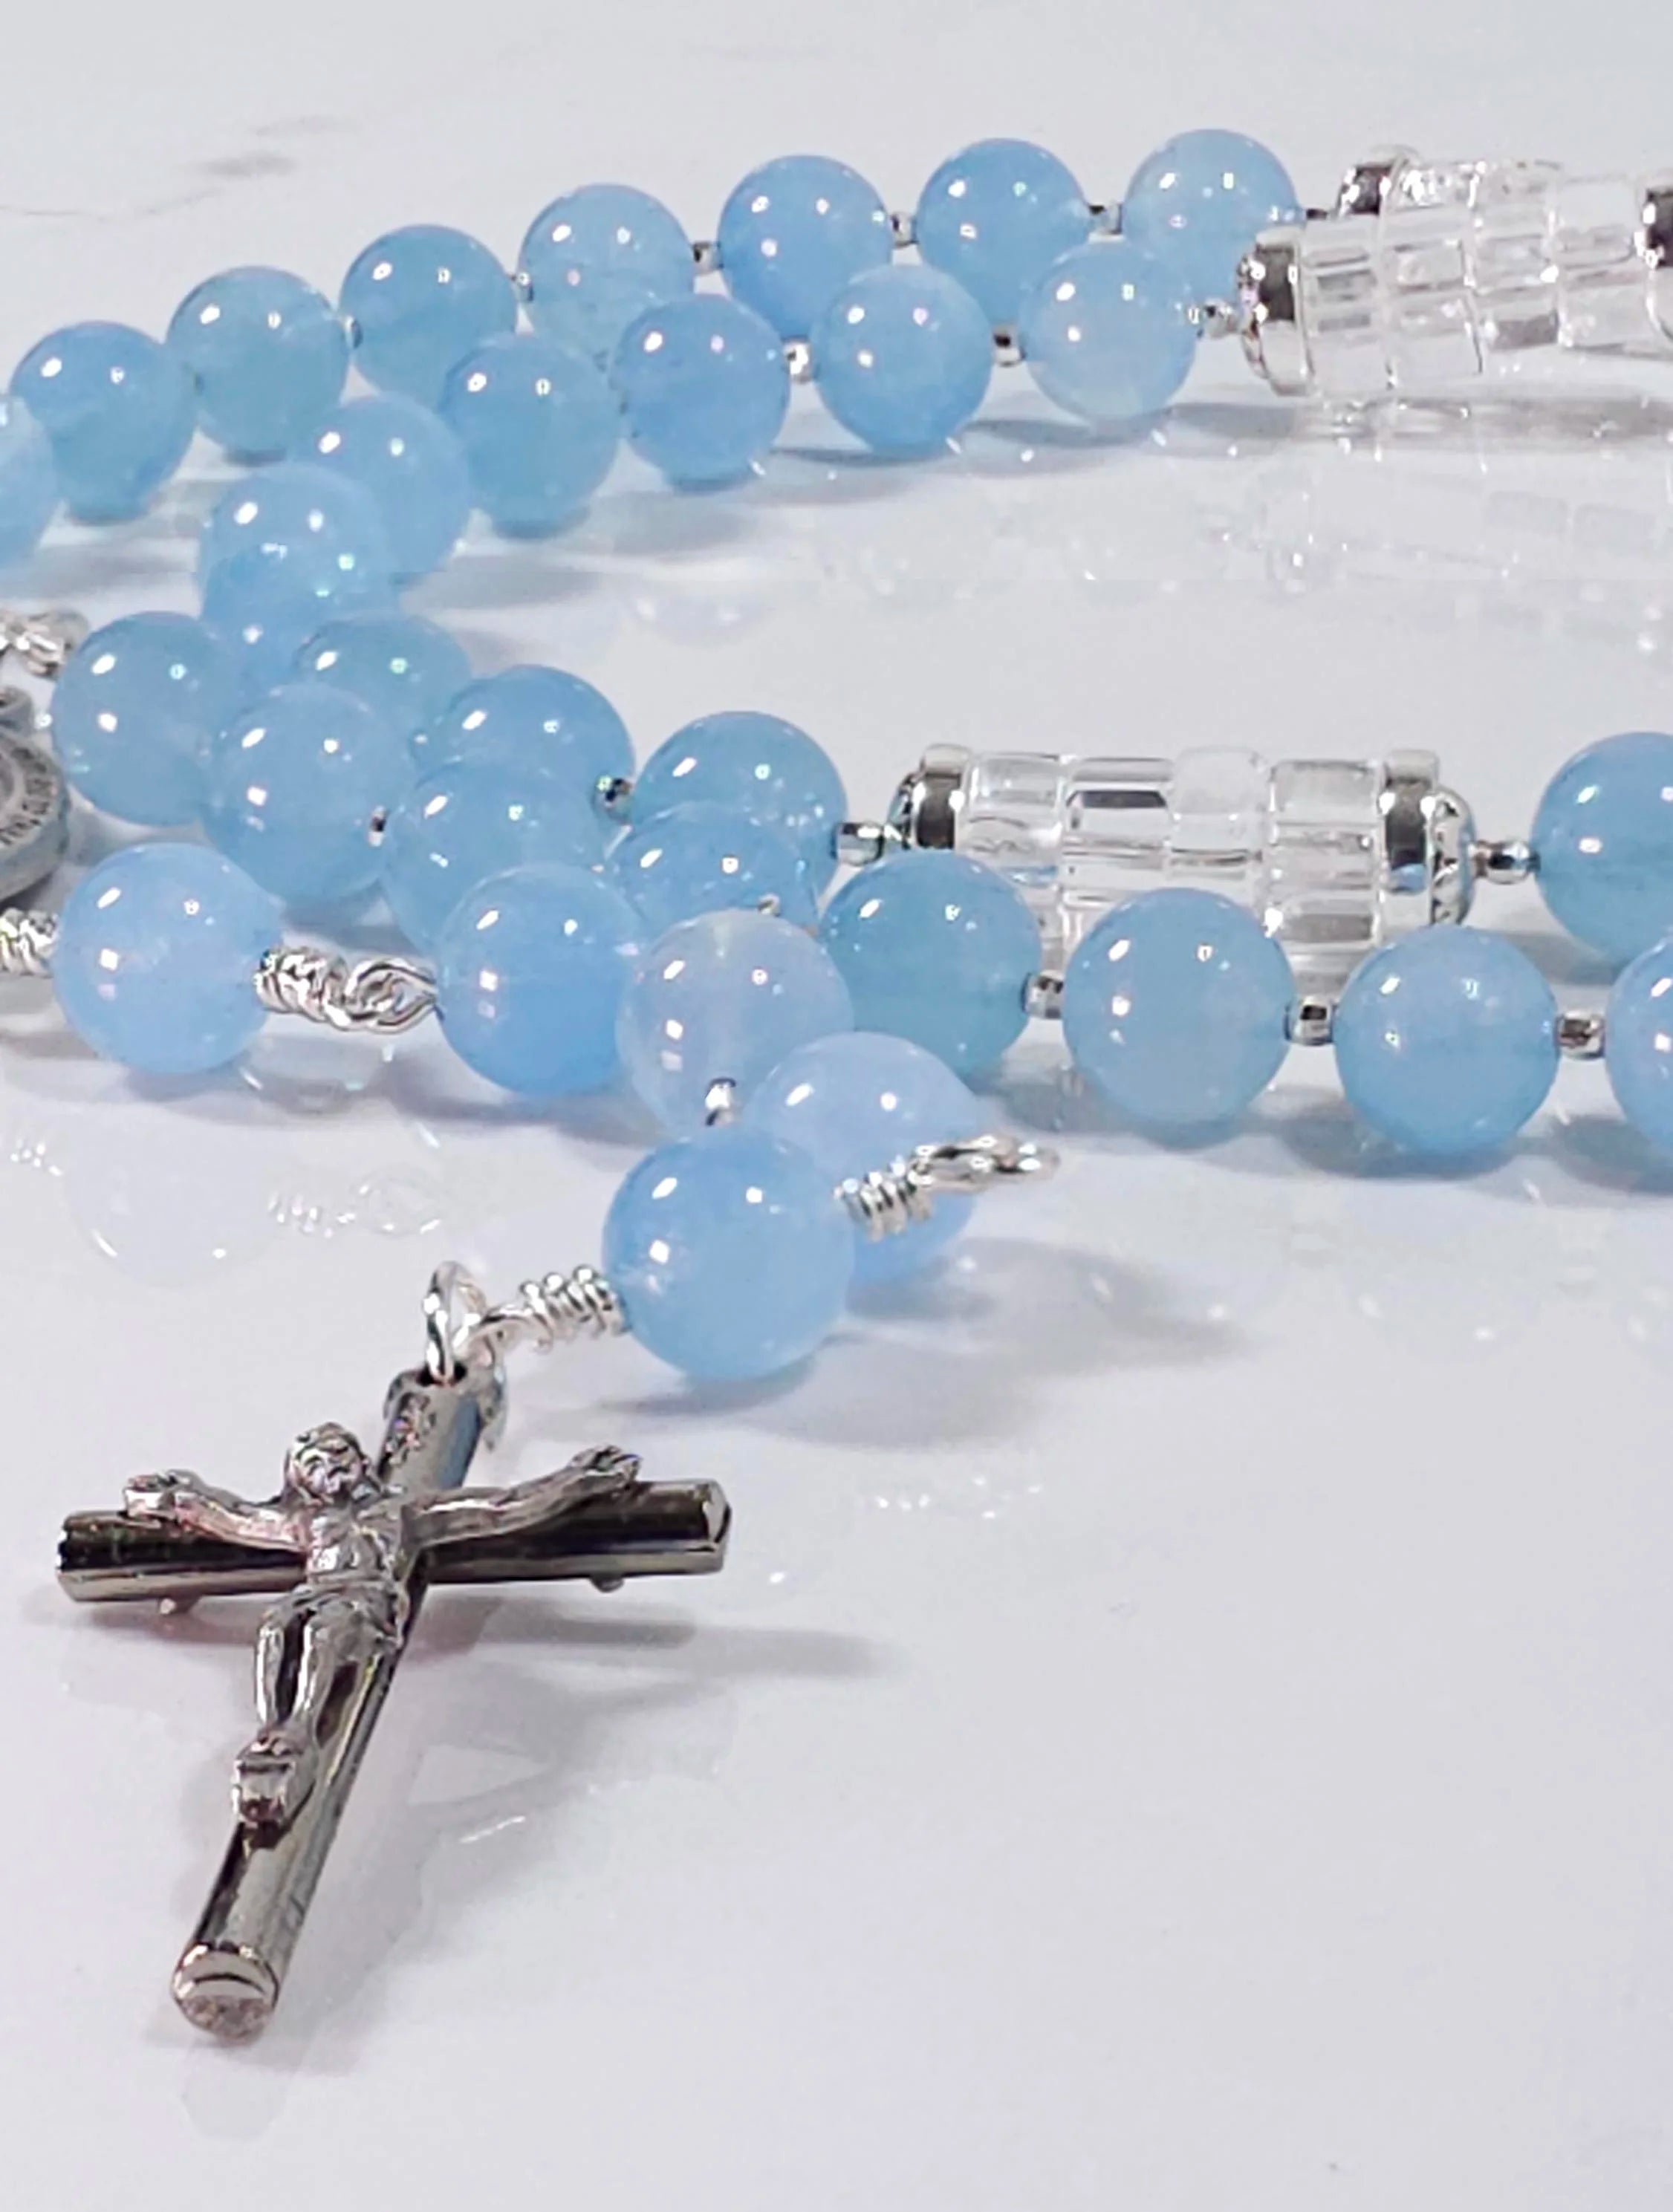 Blue rosary inspired by Marian blue color, made from aquamarine gemstone and sterling silver medal and crucifix.